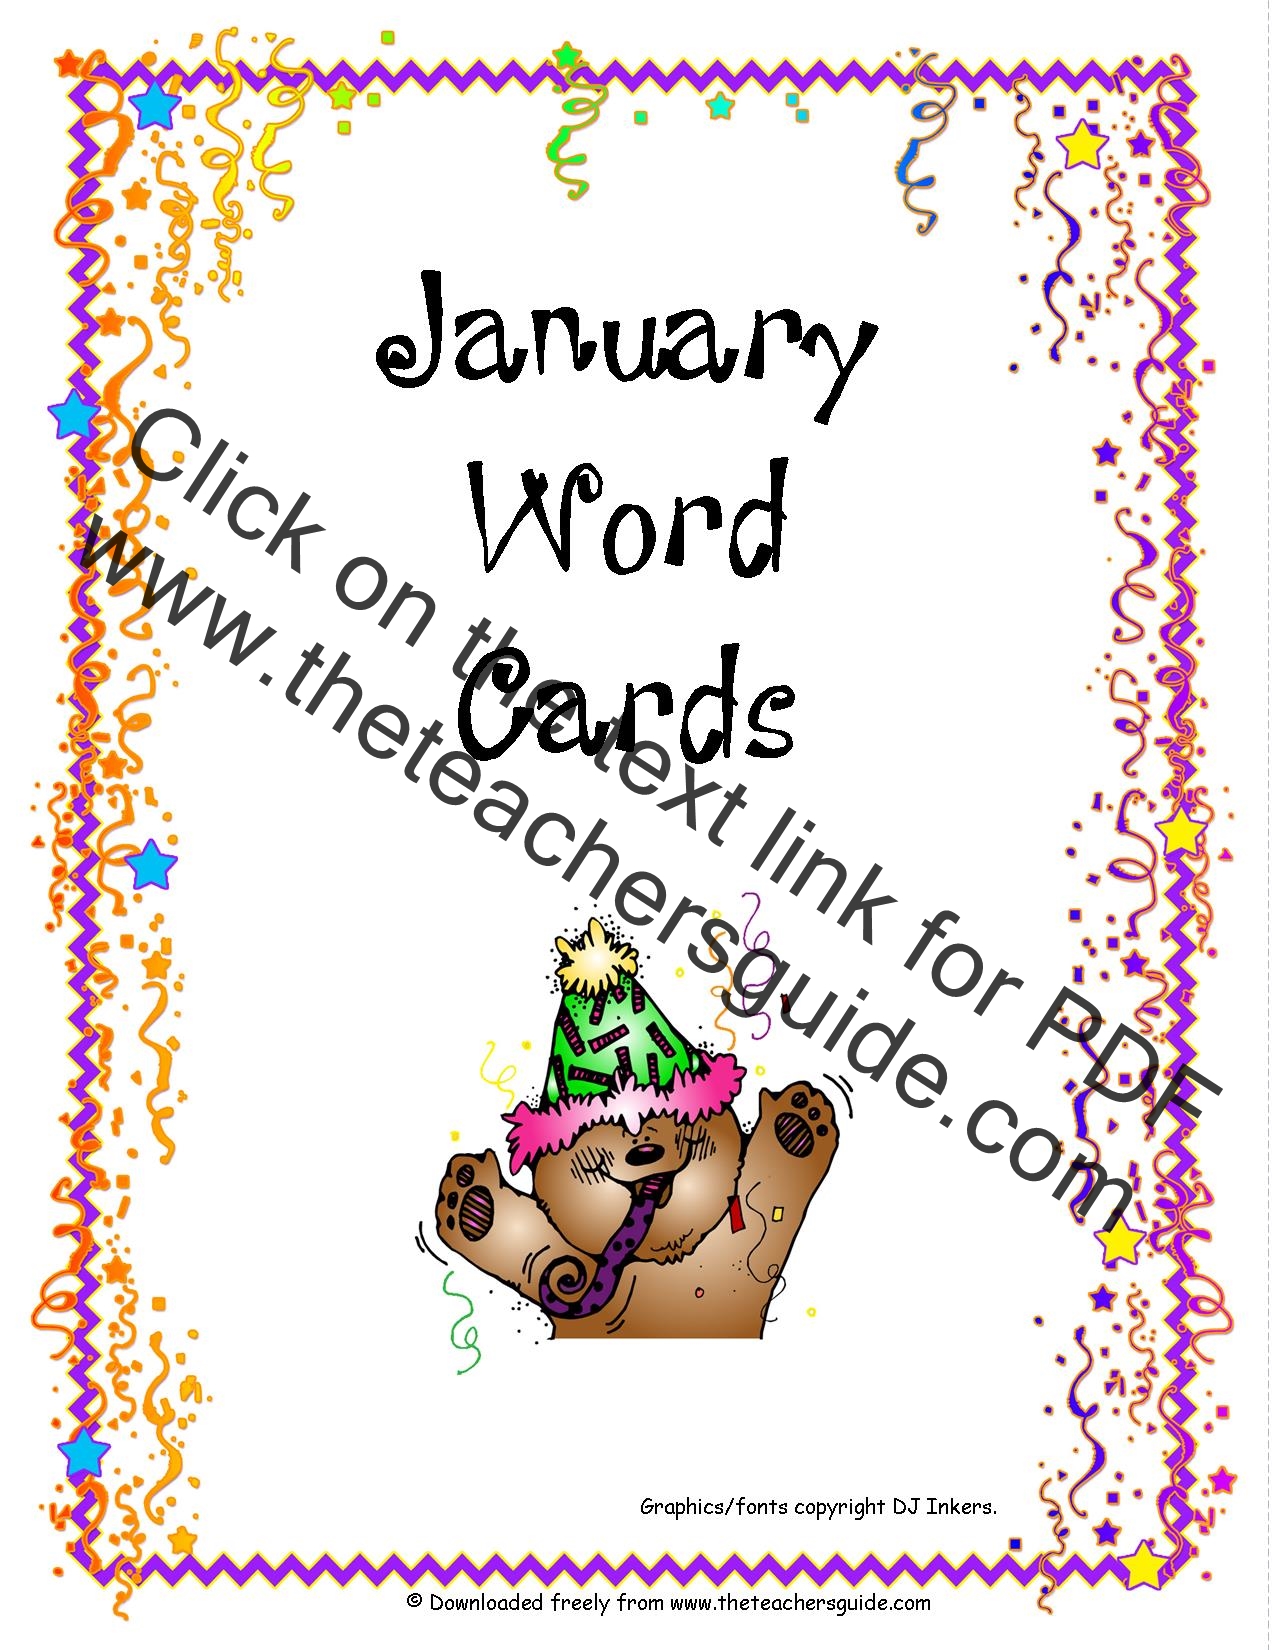 January Lesson Plans, Printouts, Crafts, Themes, and Holidays1275 x 1650